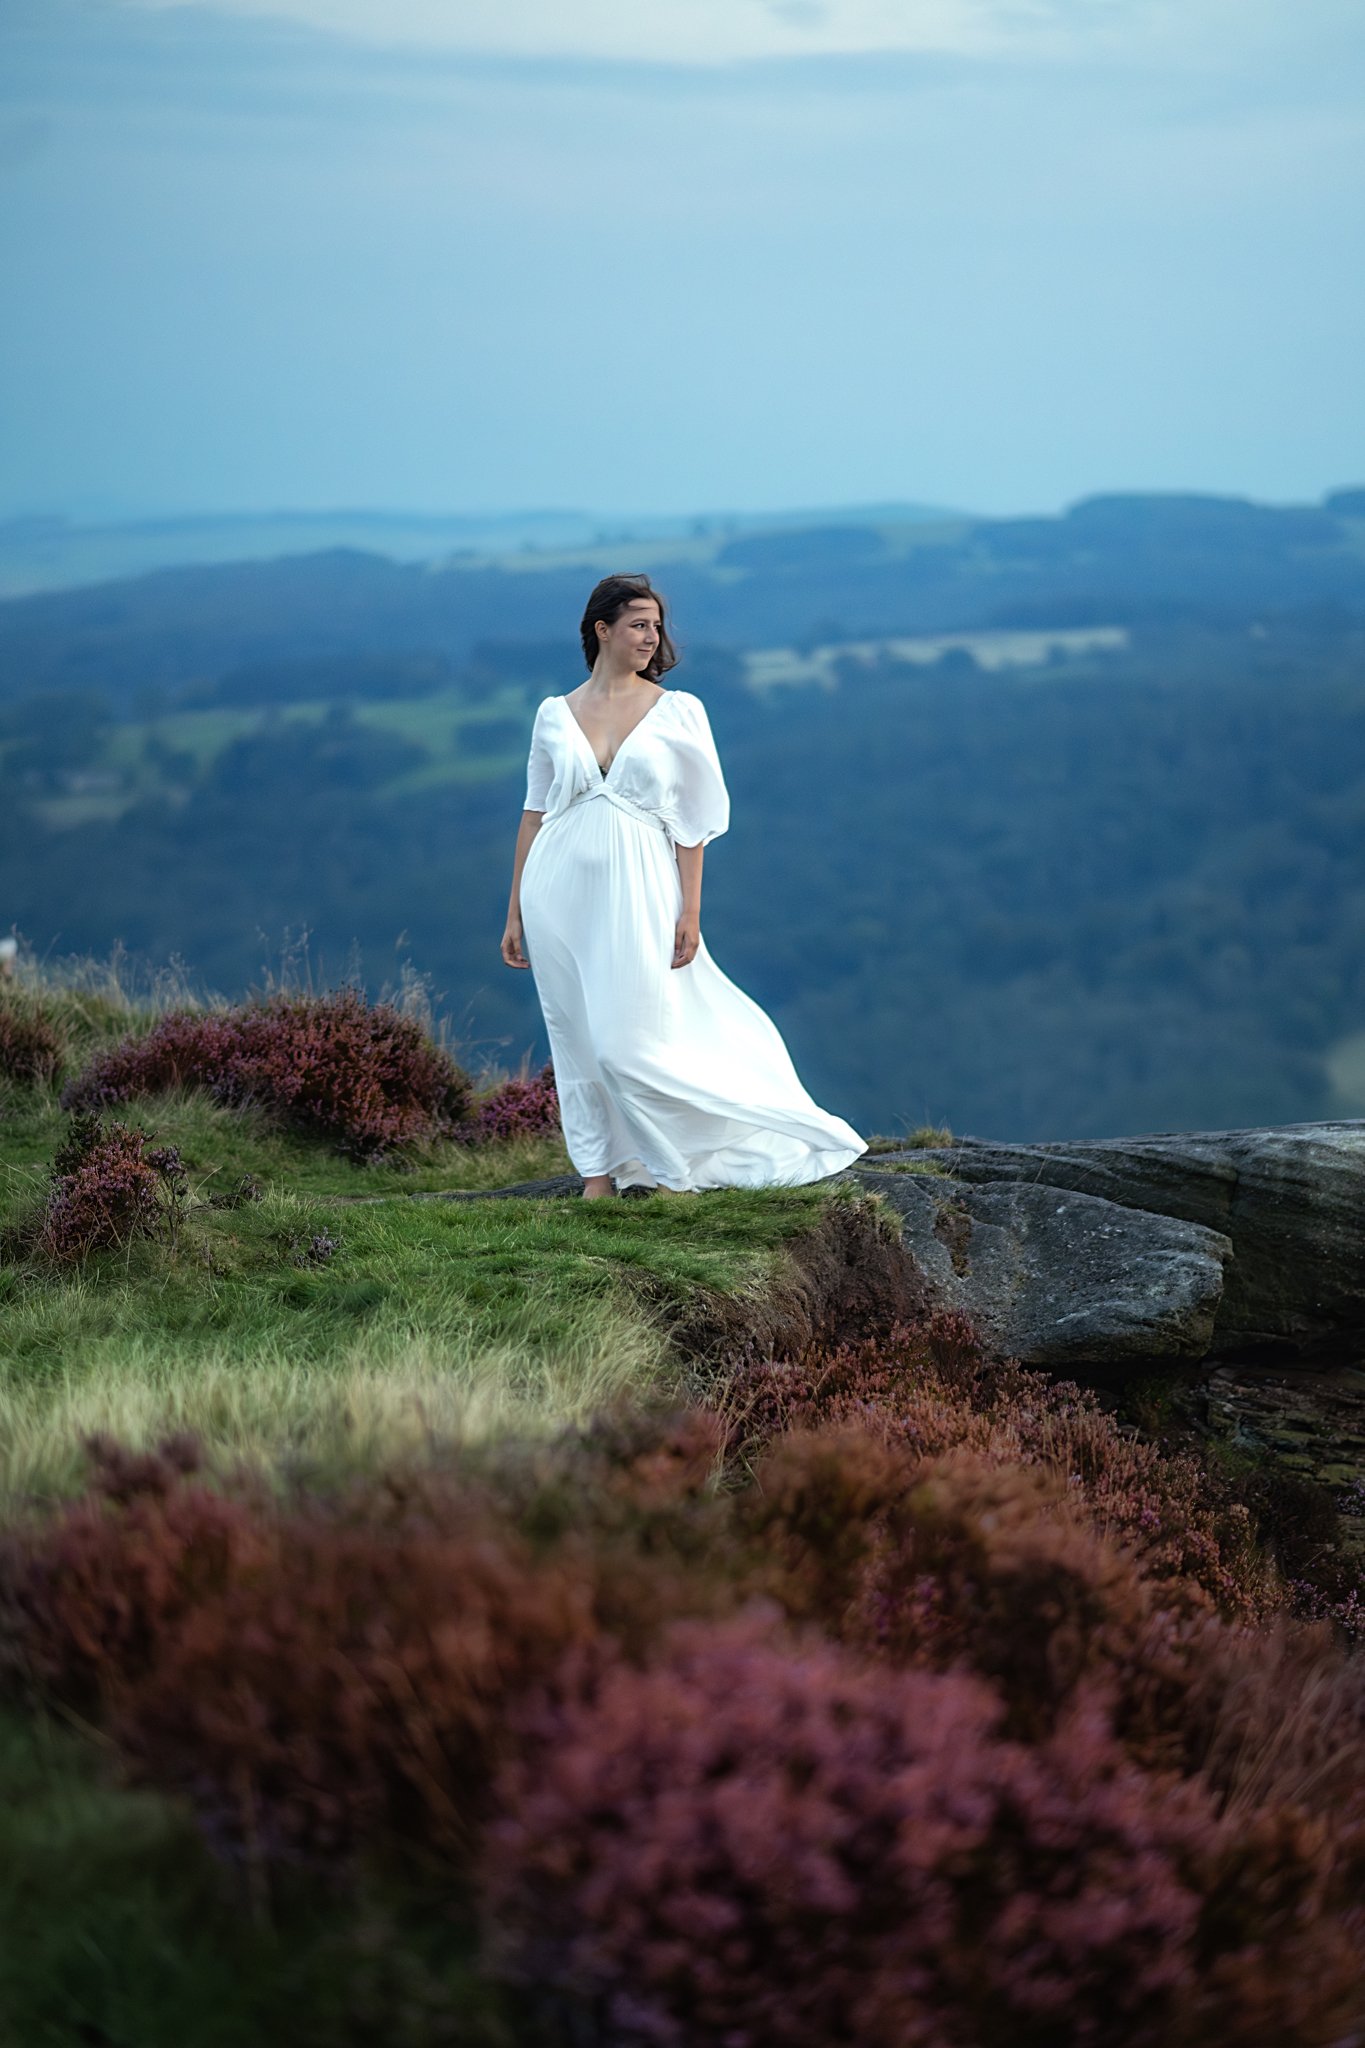 Graceful woman in a flowing white dress stands atop Mother Cap, her presence as ethereal as the surrounding heather.